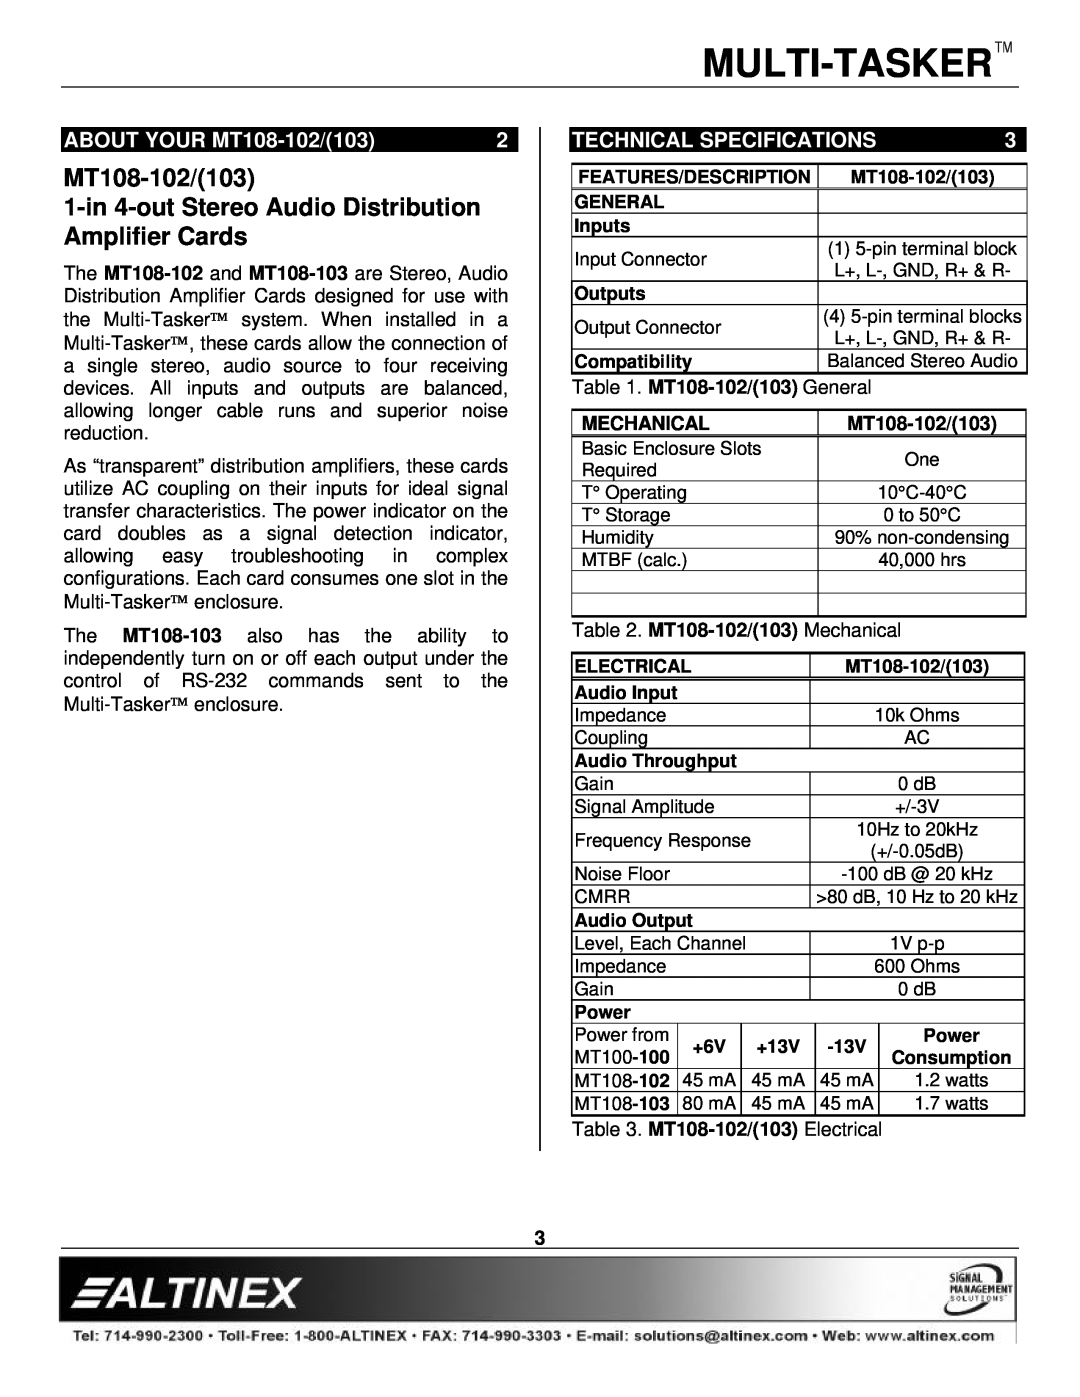 Altinex manual ABOUT YOUR MT108-102/103, Technical Specifications, Multi-Tasker, Amplifier Cards 